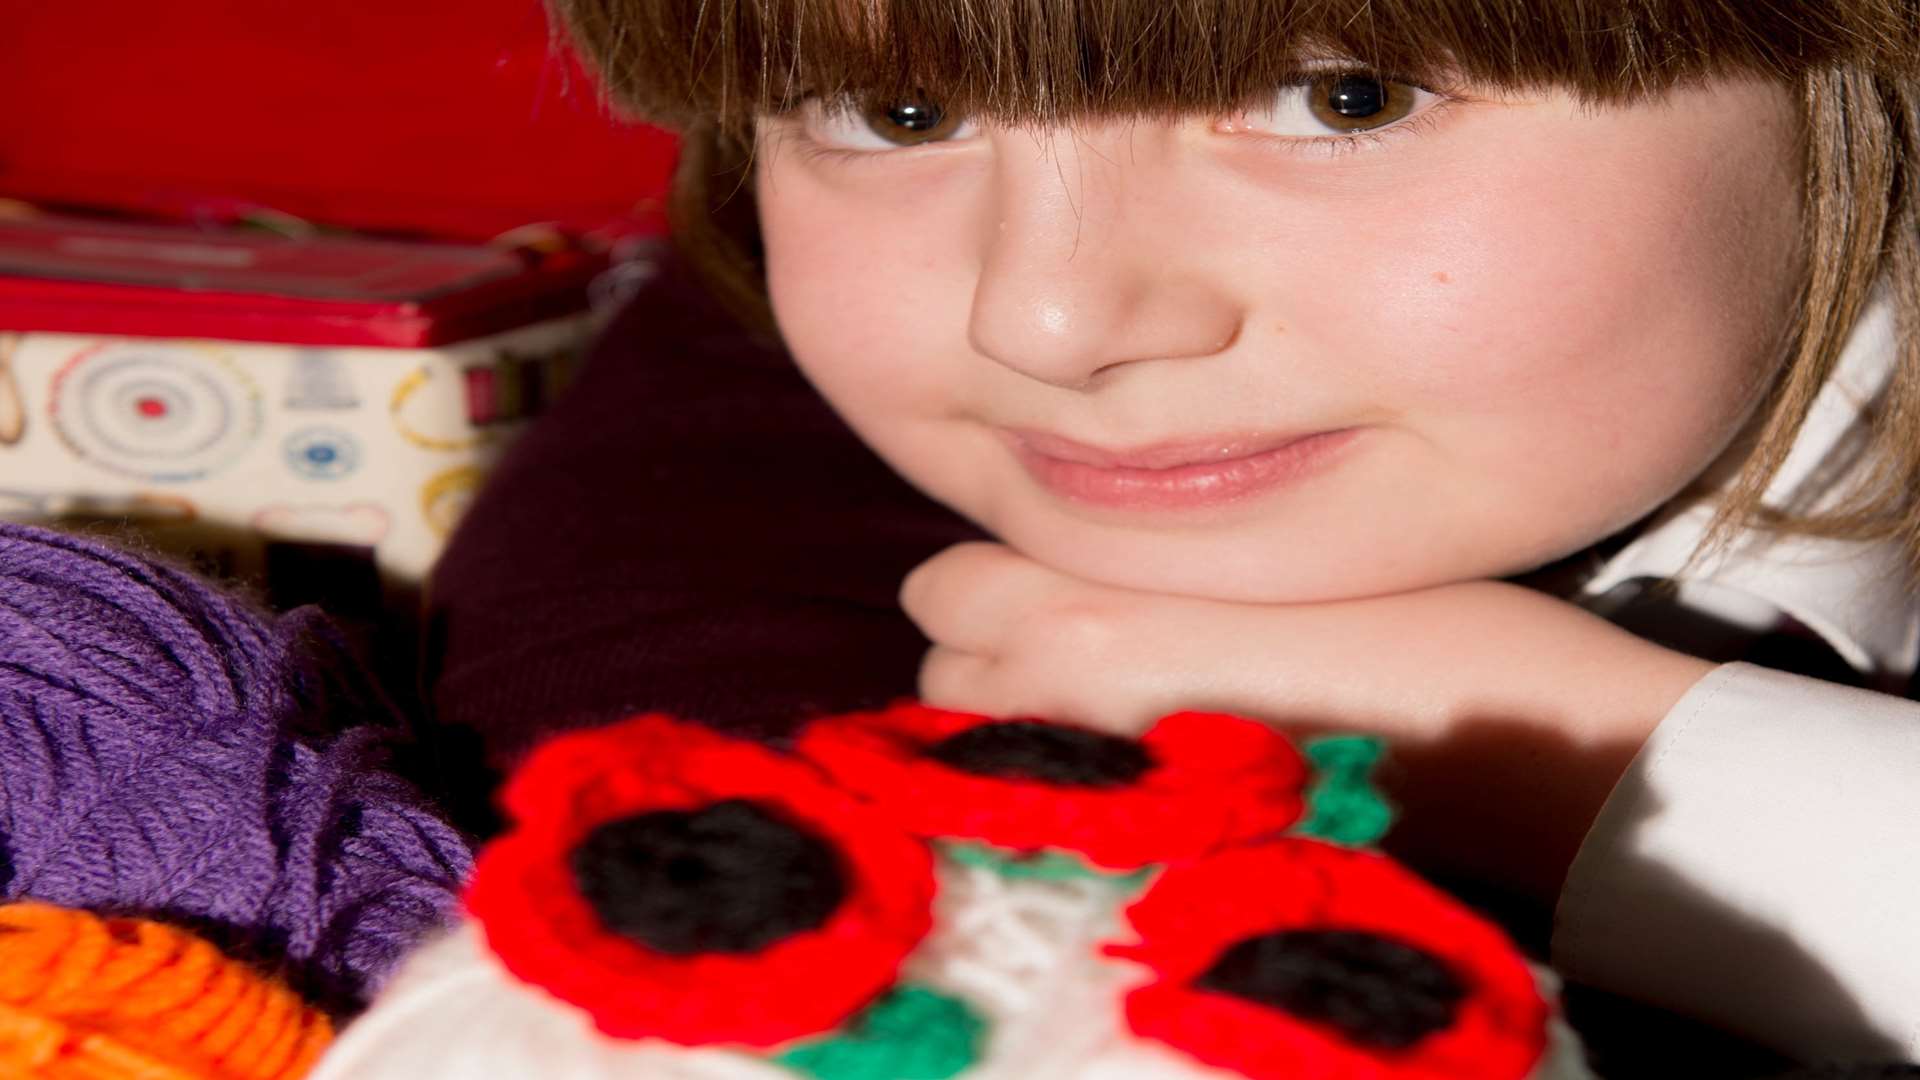 Charlotte-Mae with her poppies